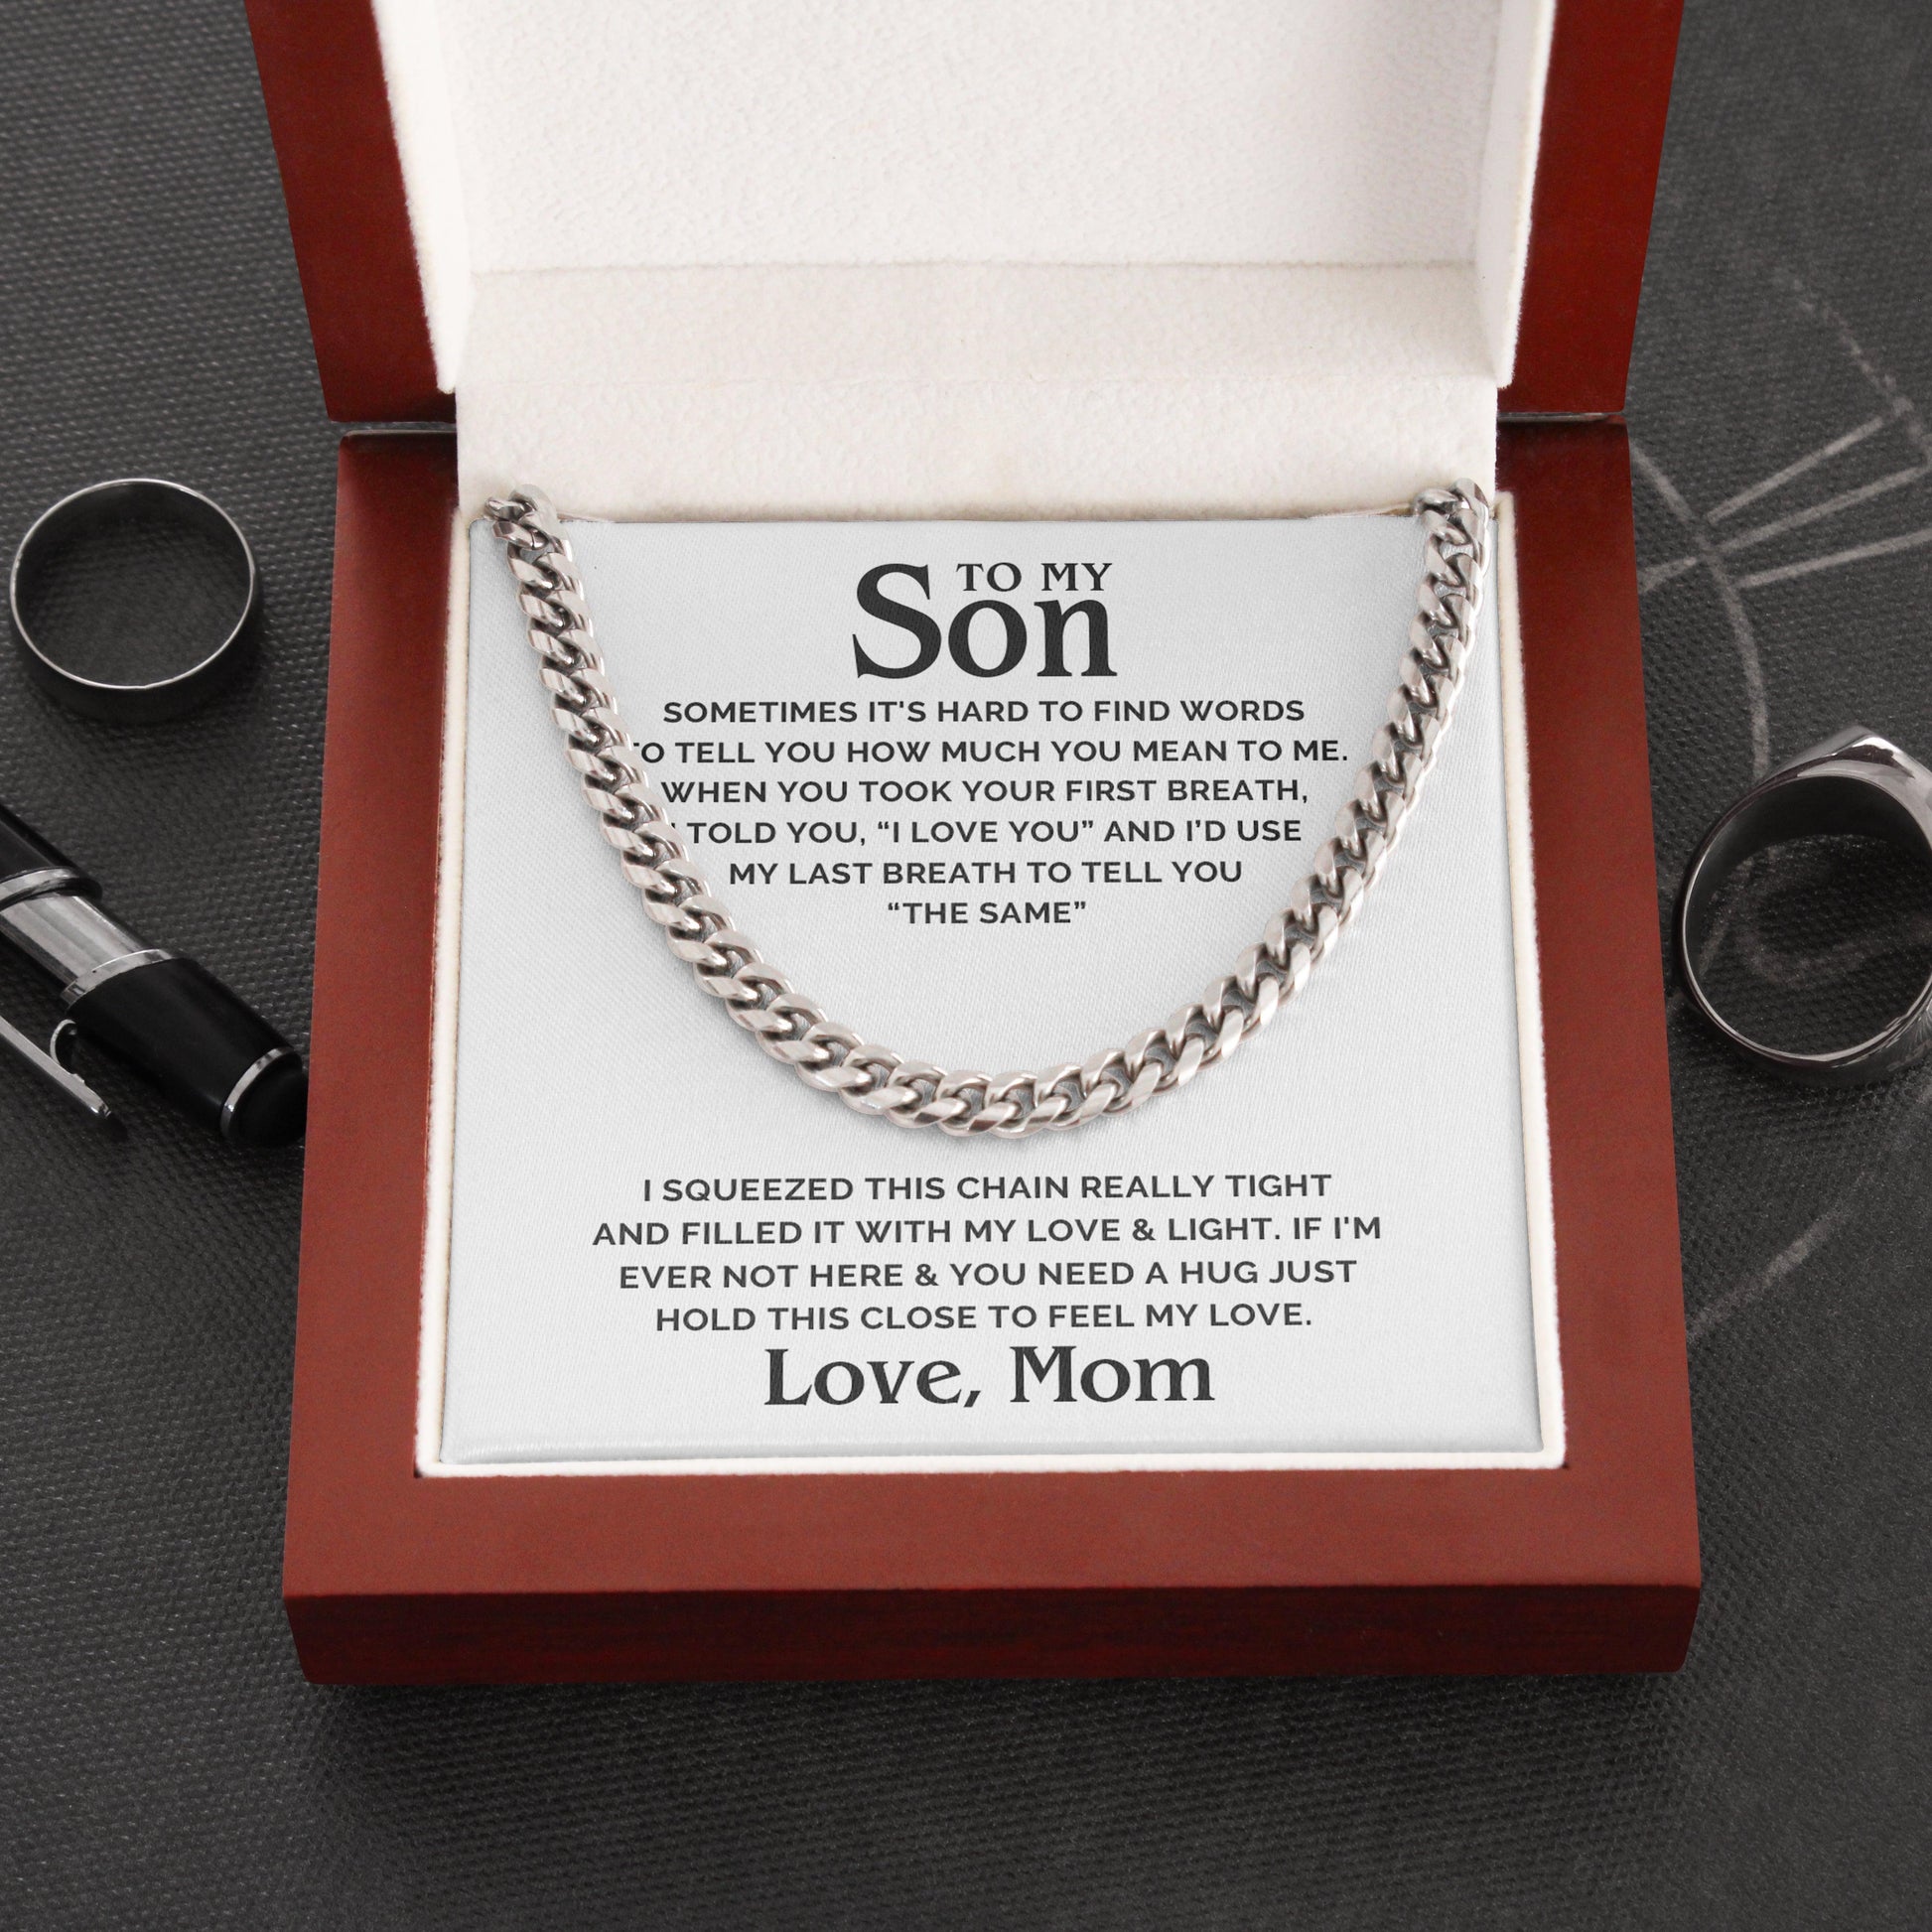 Jewelry gifts Son - Love & Light - Cuban Link Chain - Belesmé - Memorable Jewelry Gifts